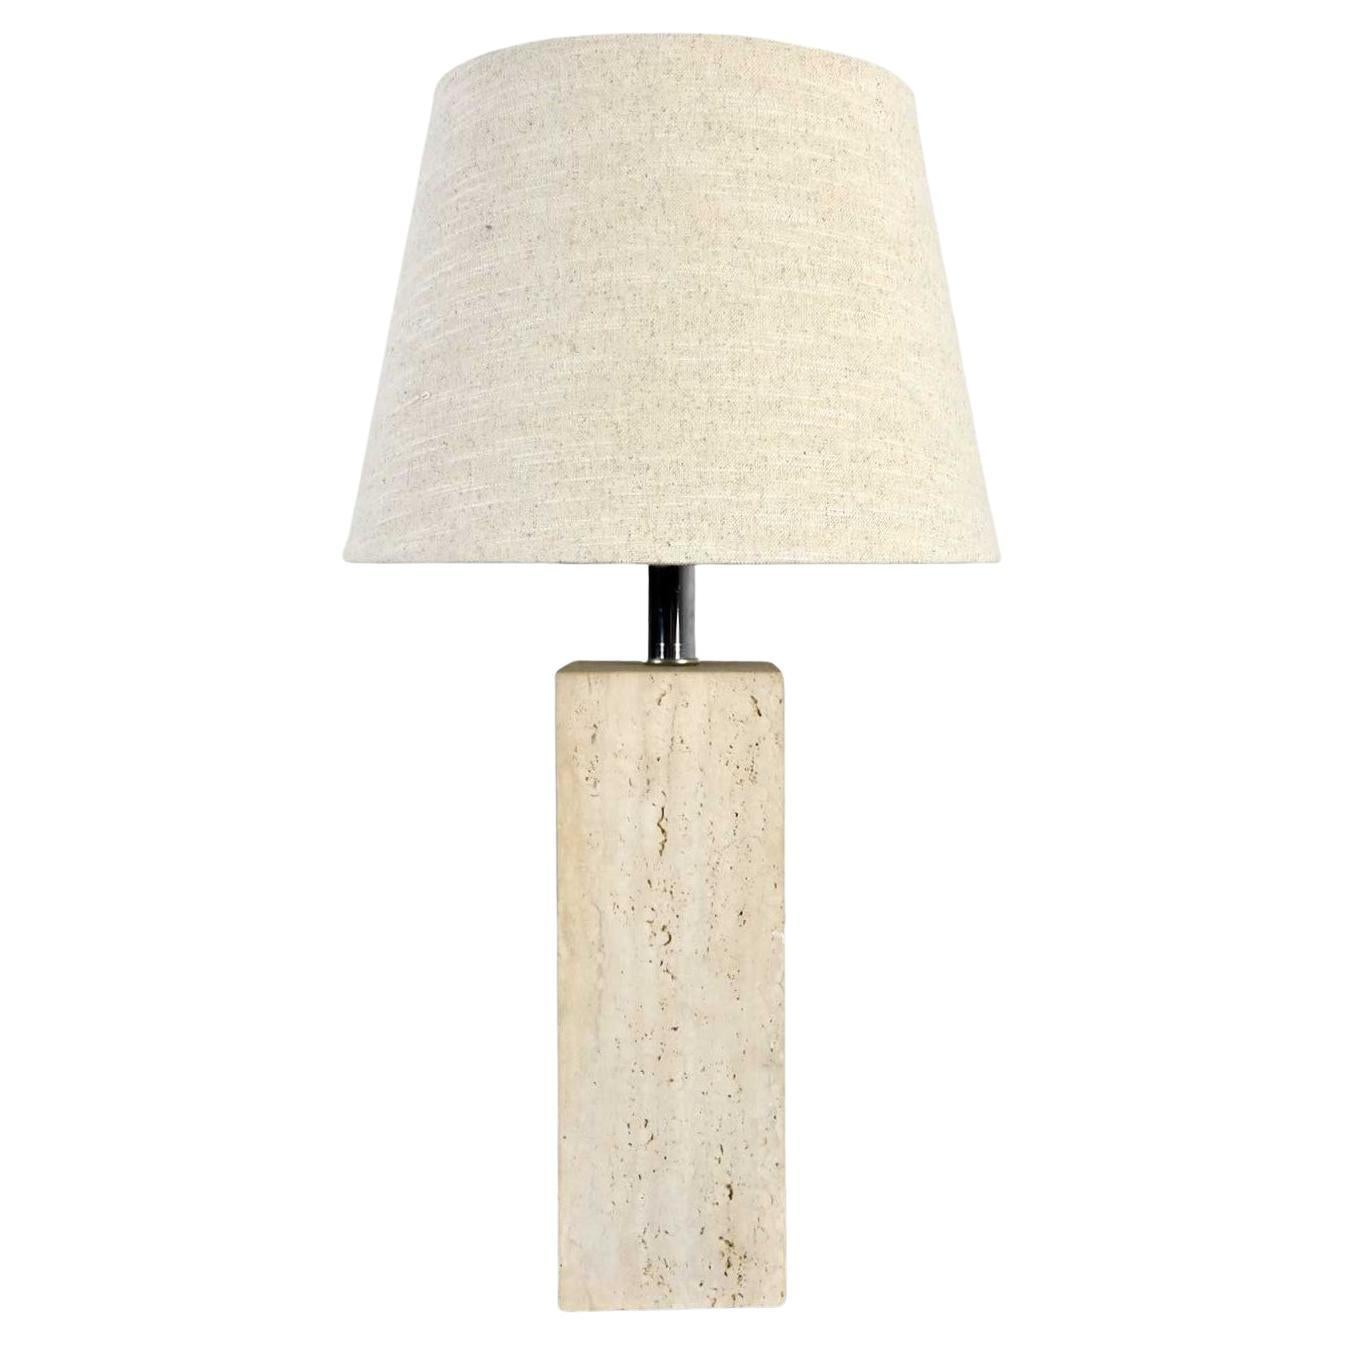 Vintage Modern Travertine Square Block Table Lamp Oatmeal Linen Tapered Drum For Sale